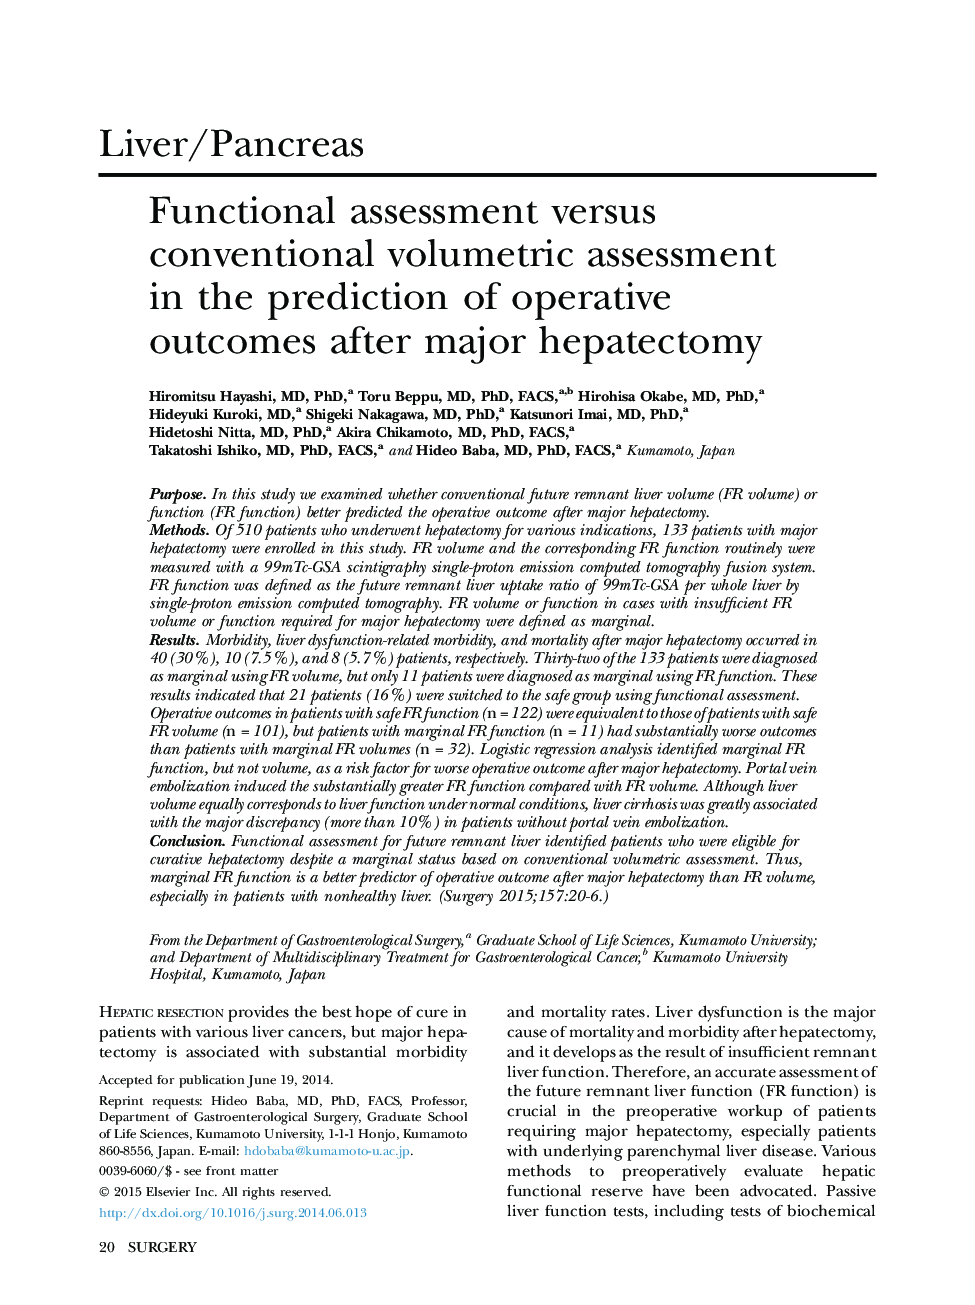 Functional assessment versus conventional volumetric assessment in the prediction of operative outcomes after major hepatectomy